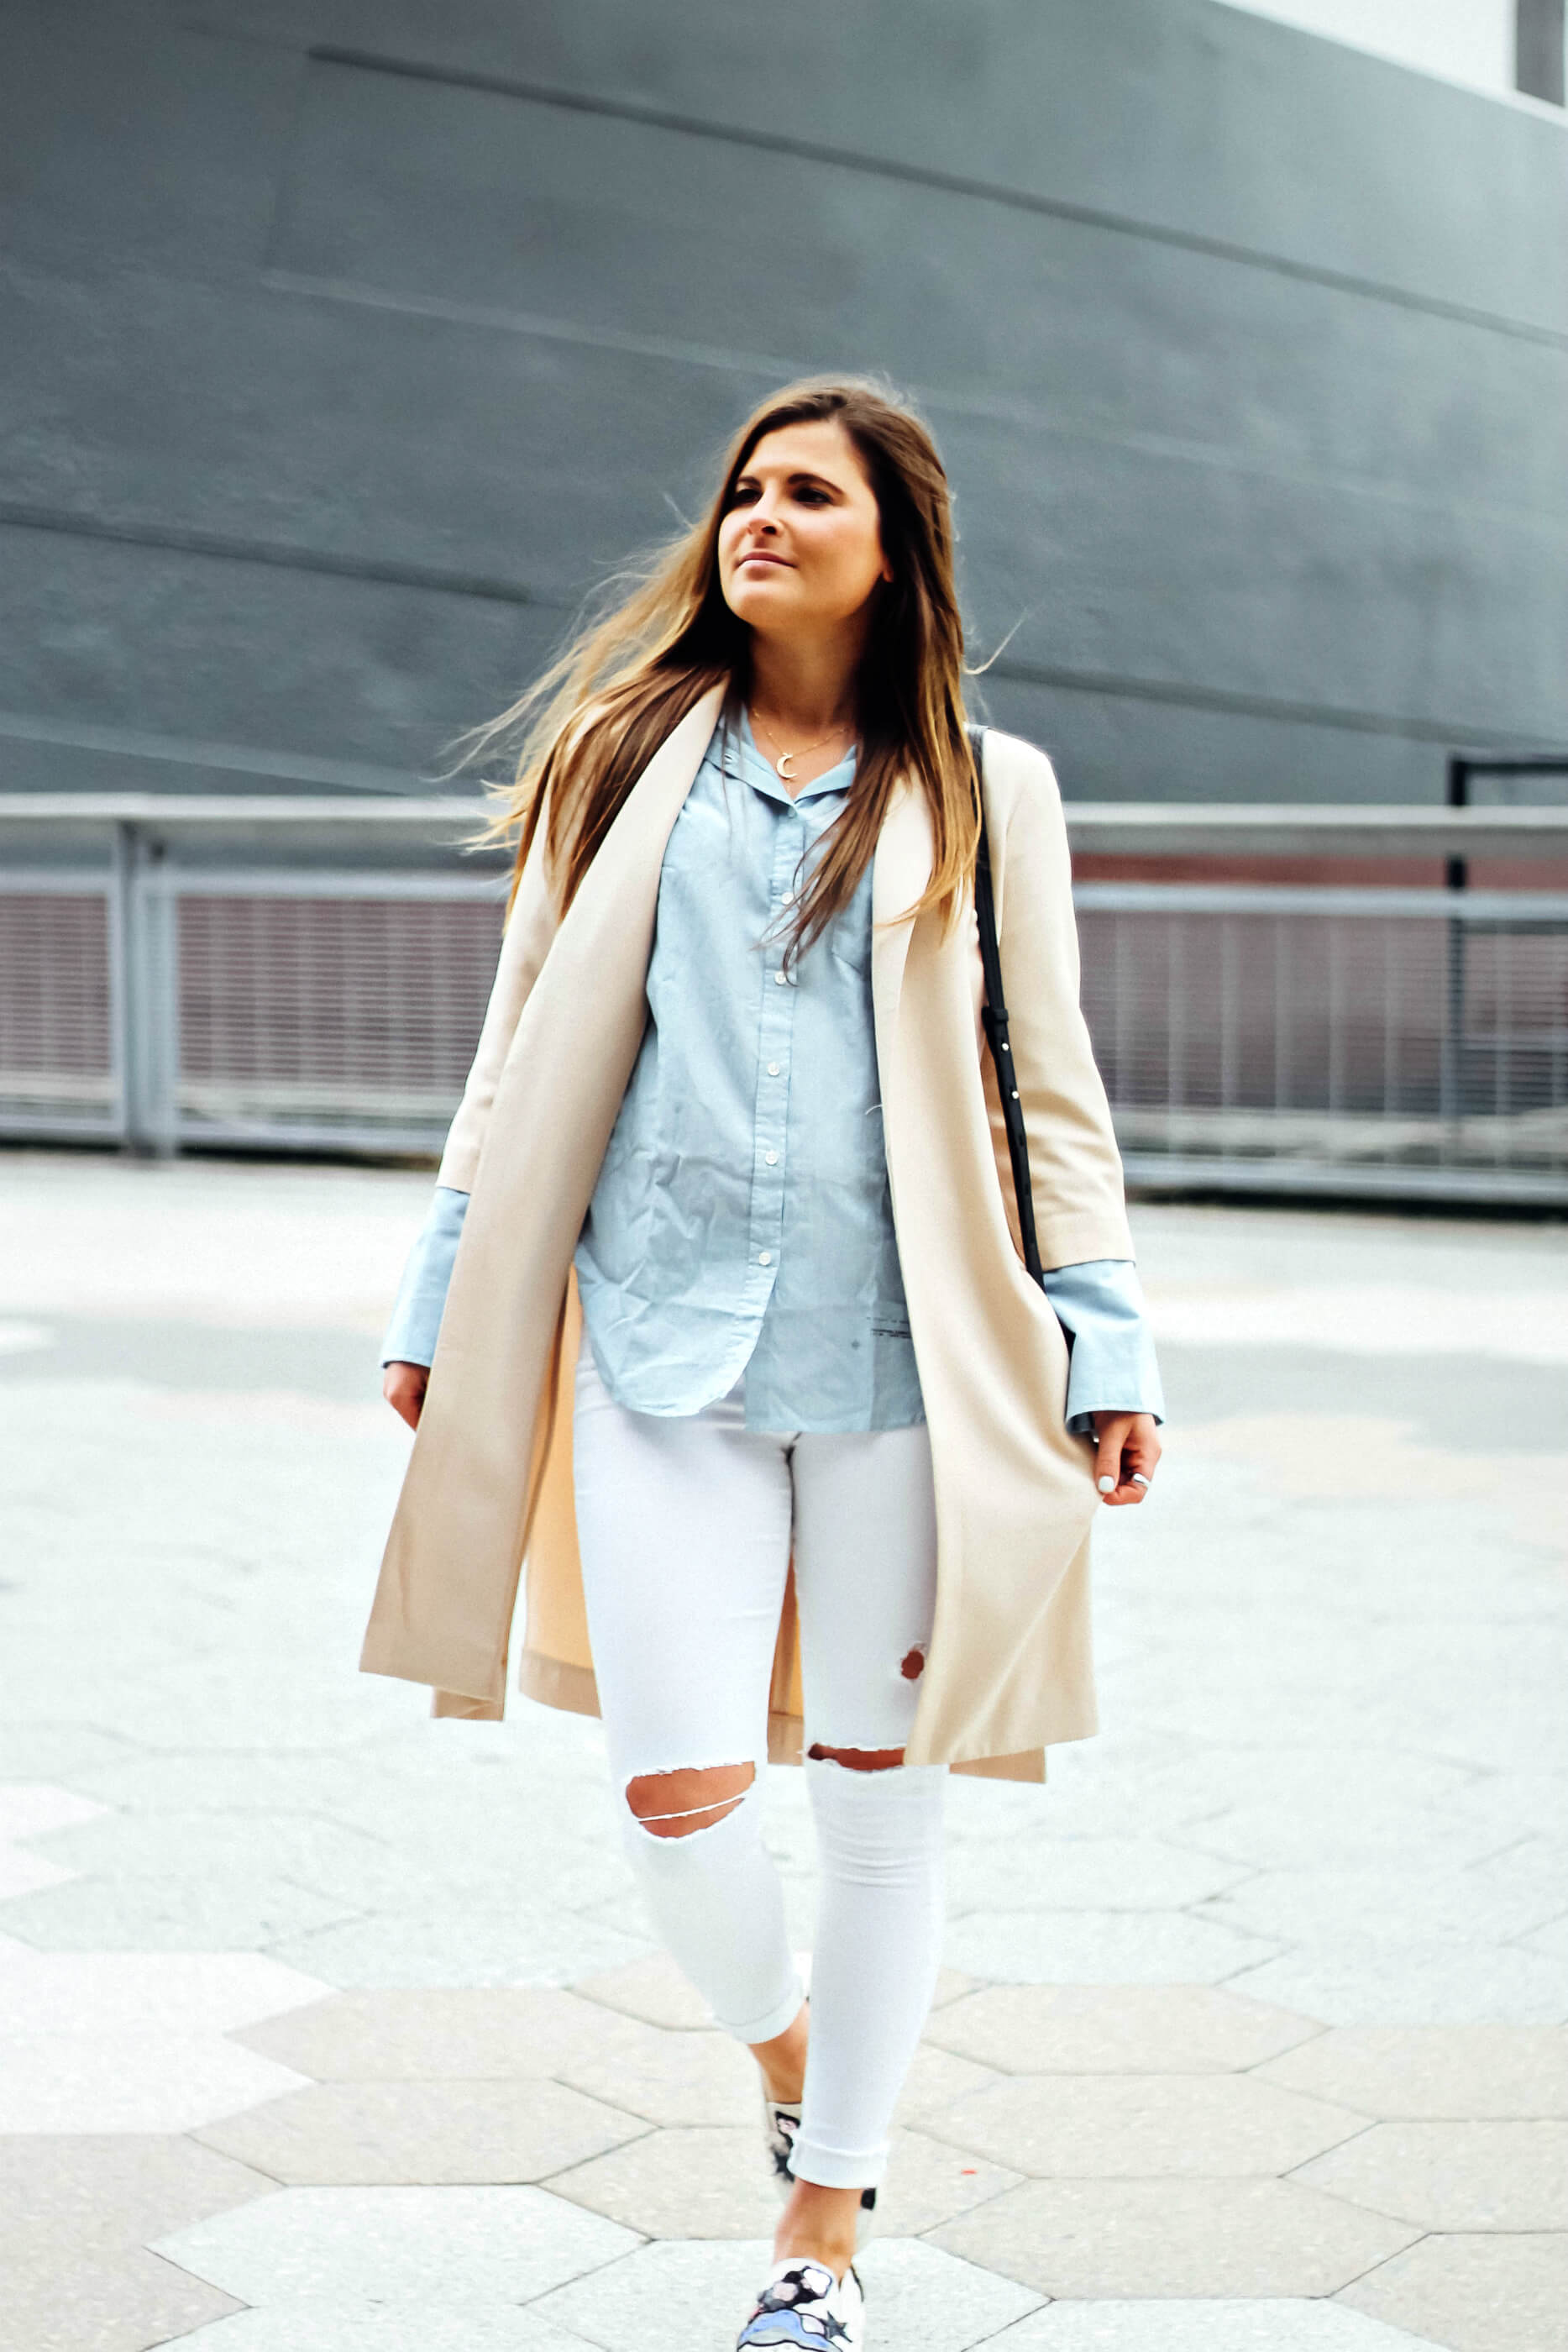 GANT Rugger Striped Shirt, Topshop White Jeans, Trench Duster, Spring Style, Tilden of To Be Bright